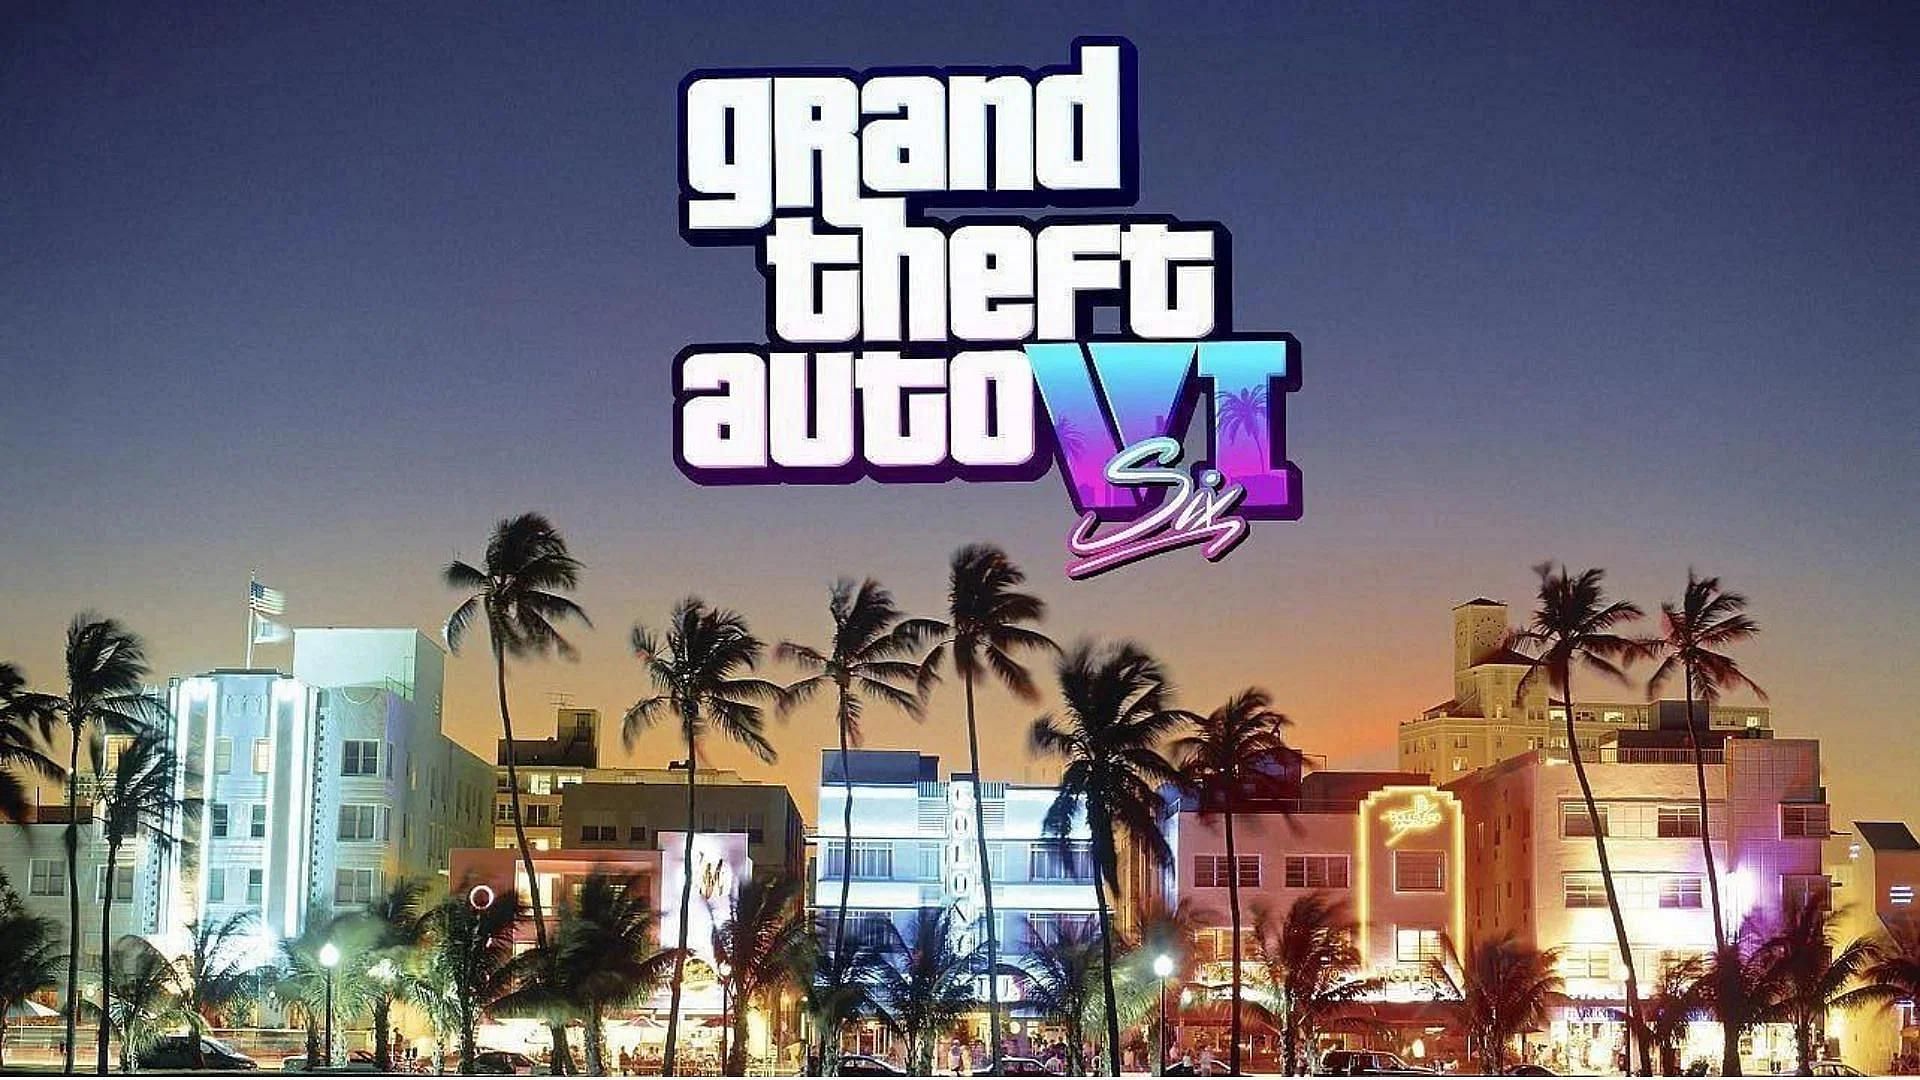 gta 6 trailer release date: GTA 6 trailer release date, time: When